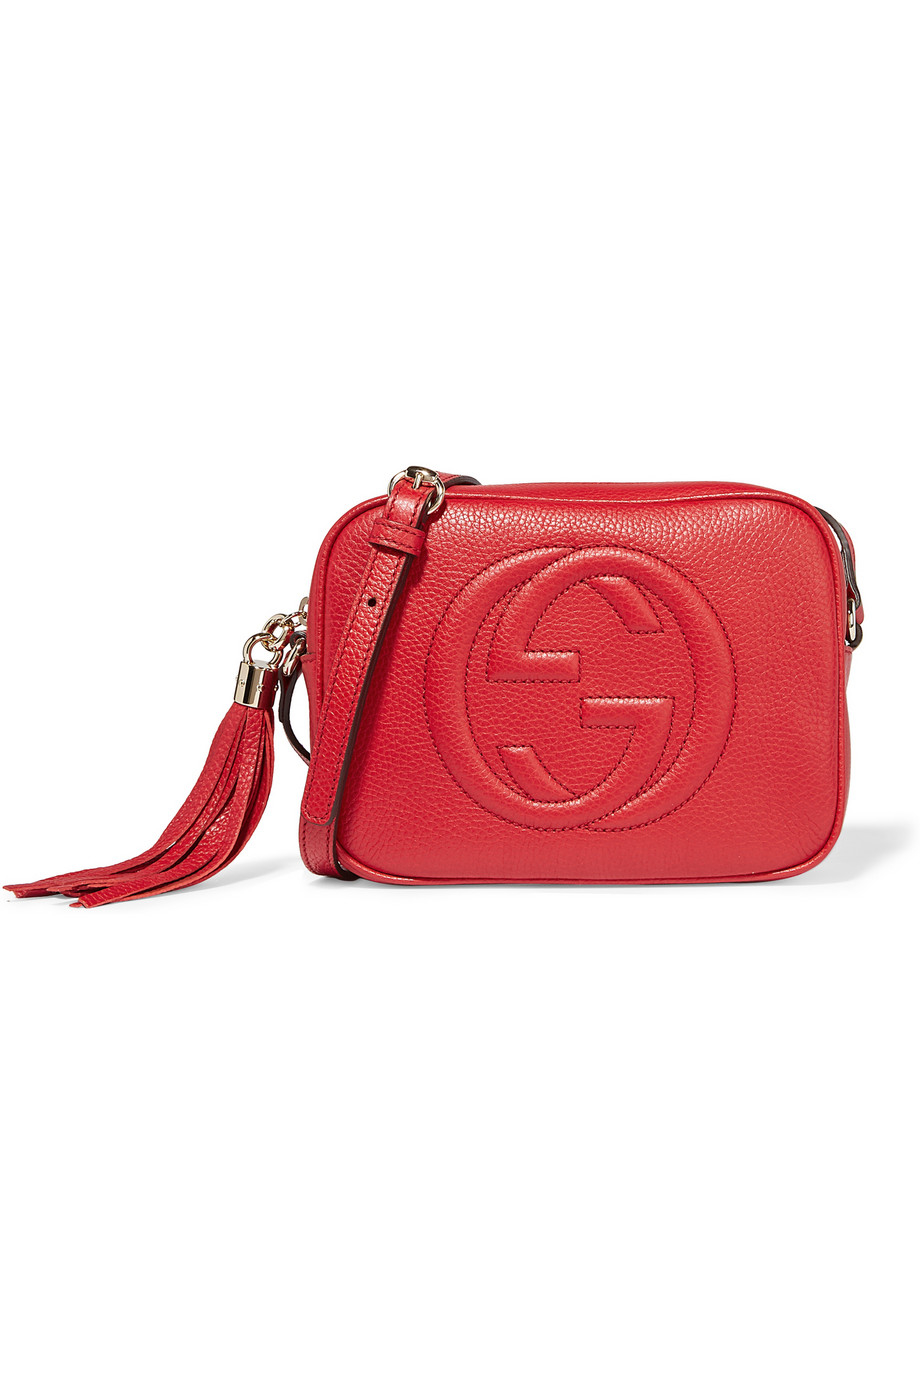 Lyst - Gucci Soho Leather Disco Bag in Red